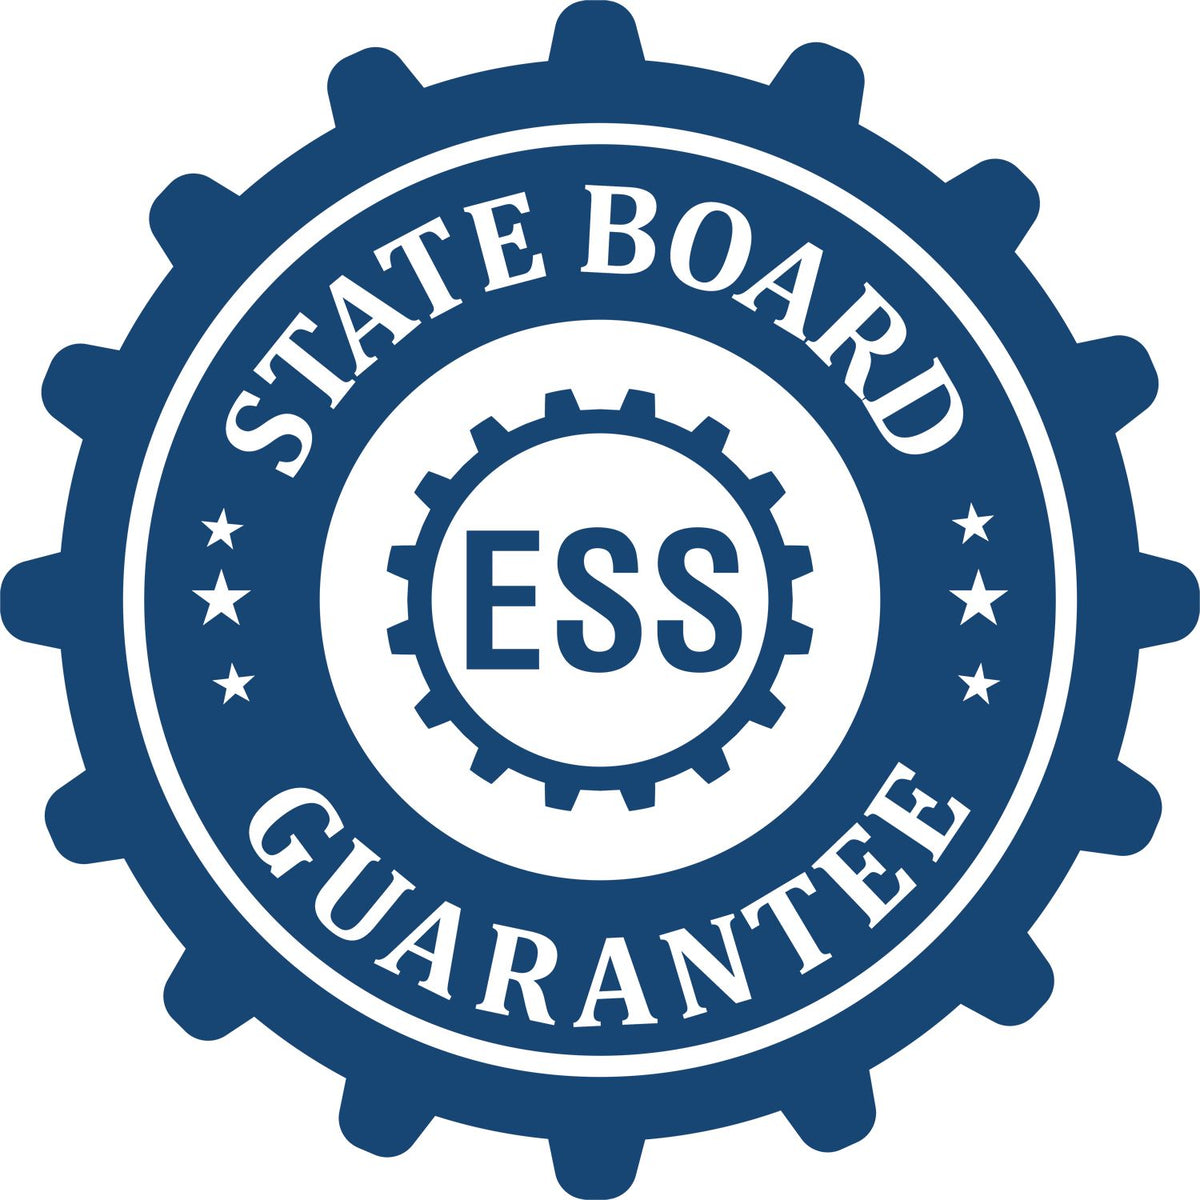 An emblem in a gear shape illustrating a state board guarantee for the Iowa Desk Architect Embossing Seal product.